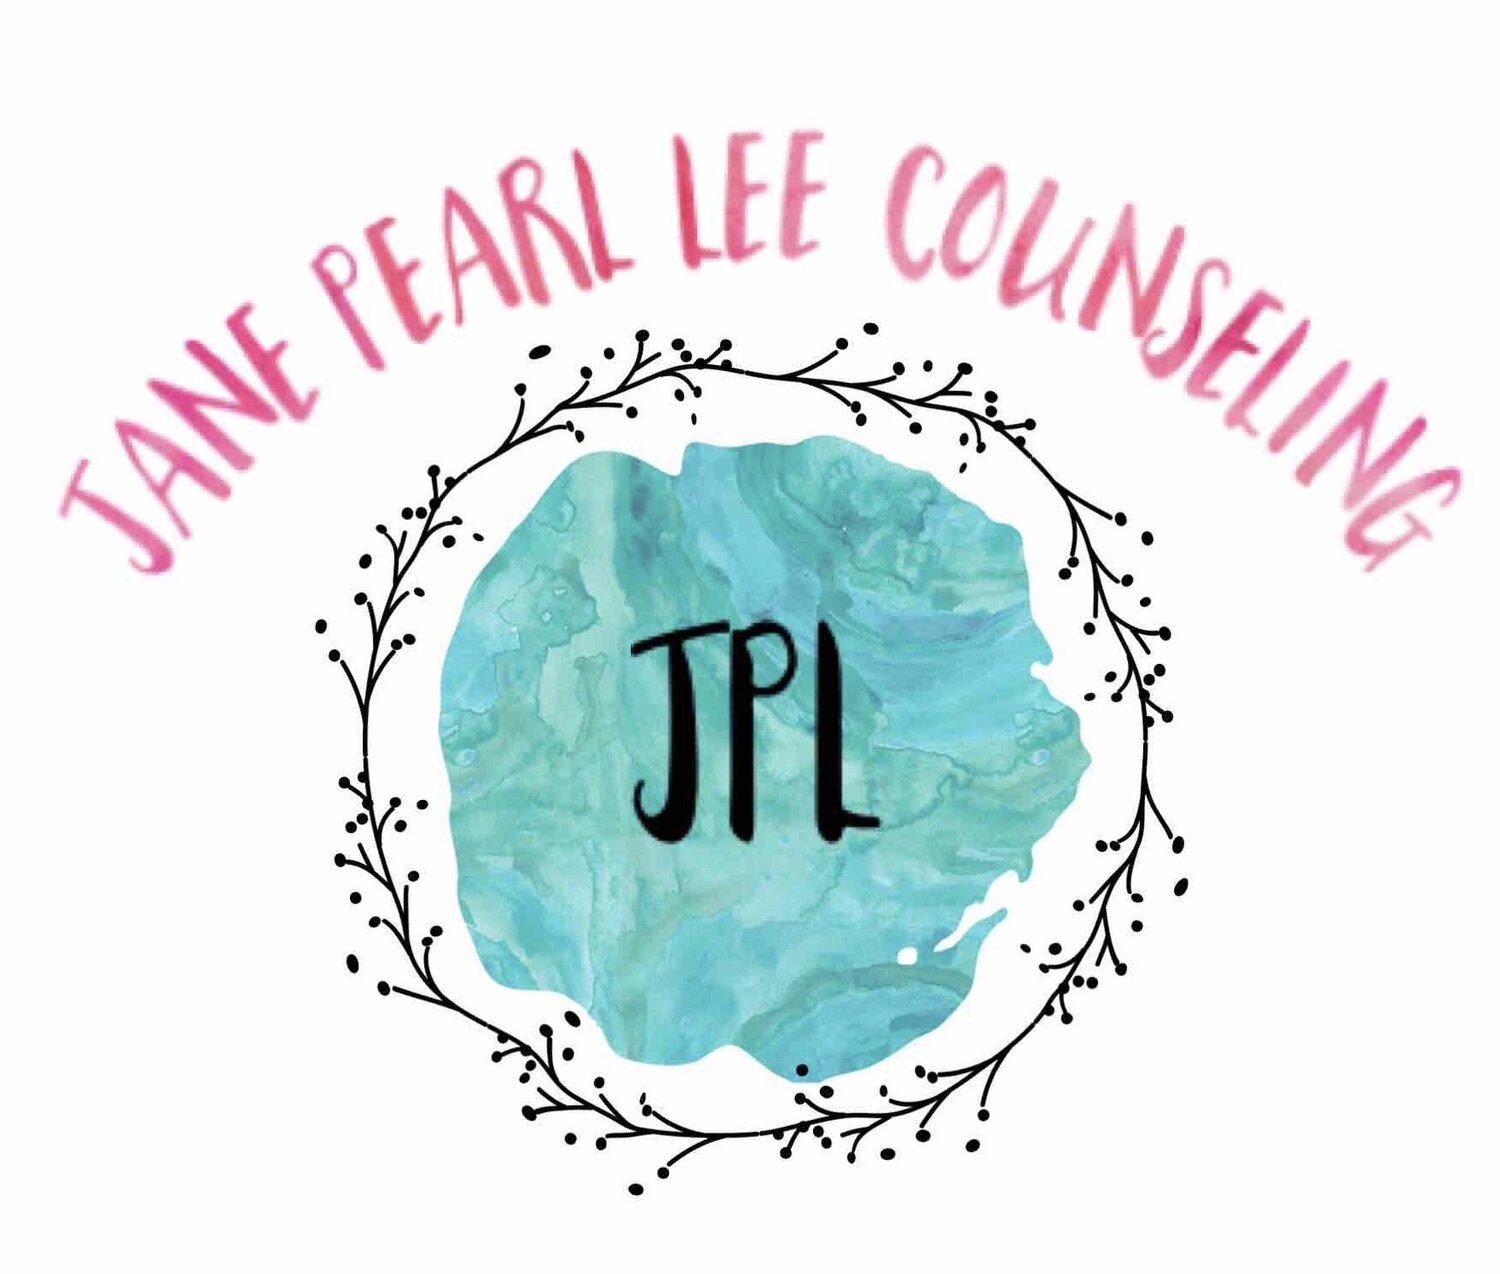  Anxiety Therapist in Orange County, Tustin CA 92780 | Jane Pearl Lee Counseling